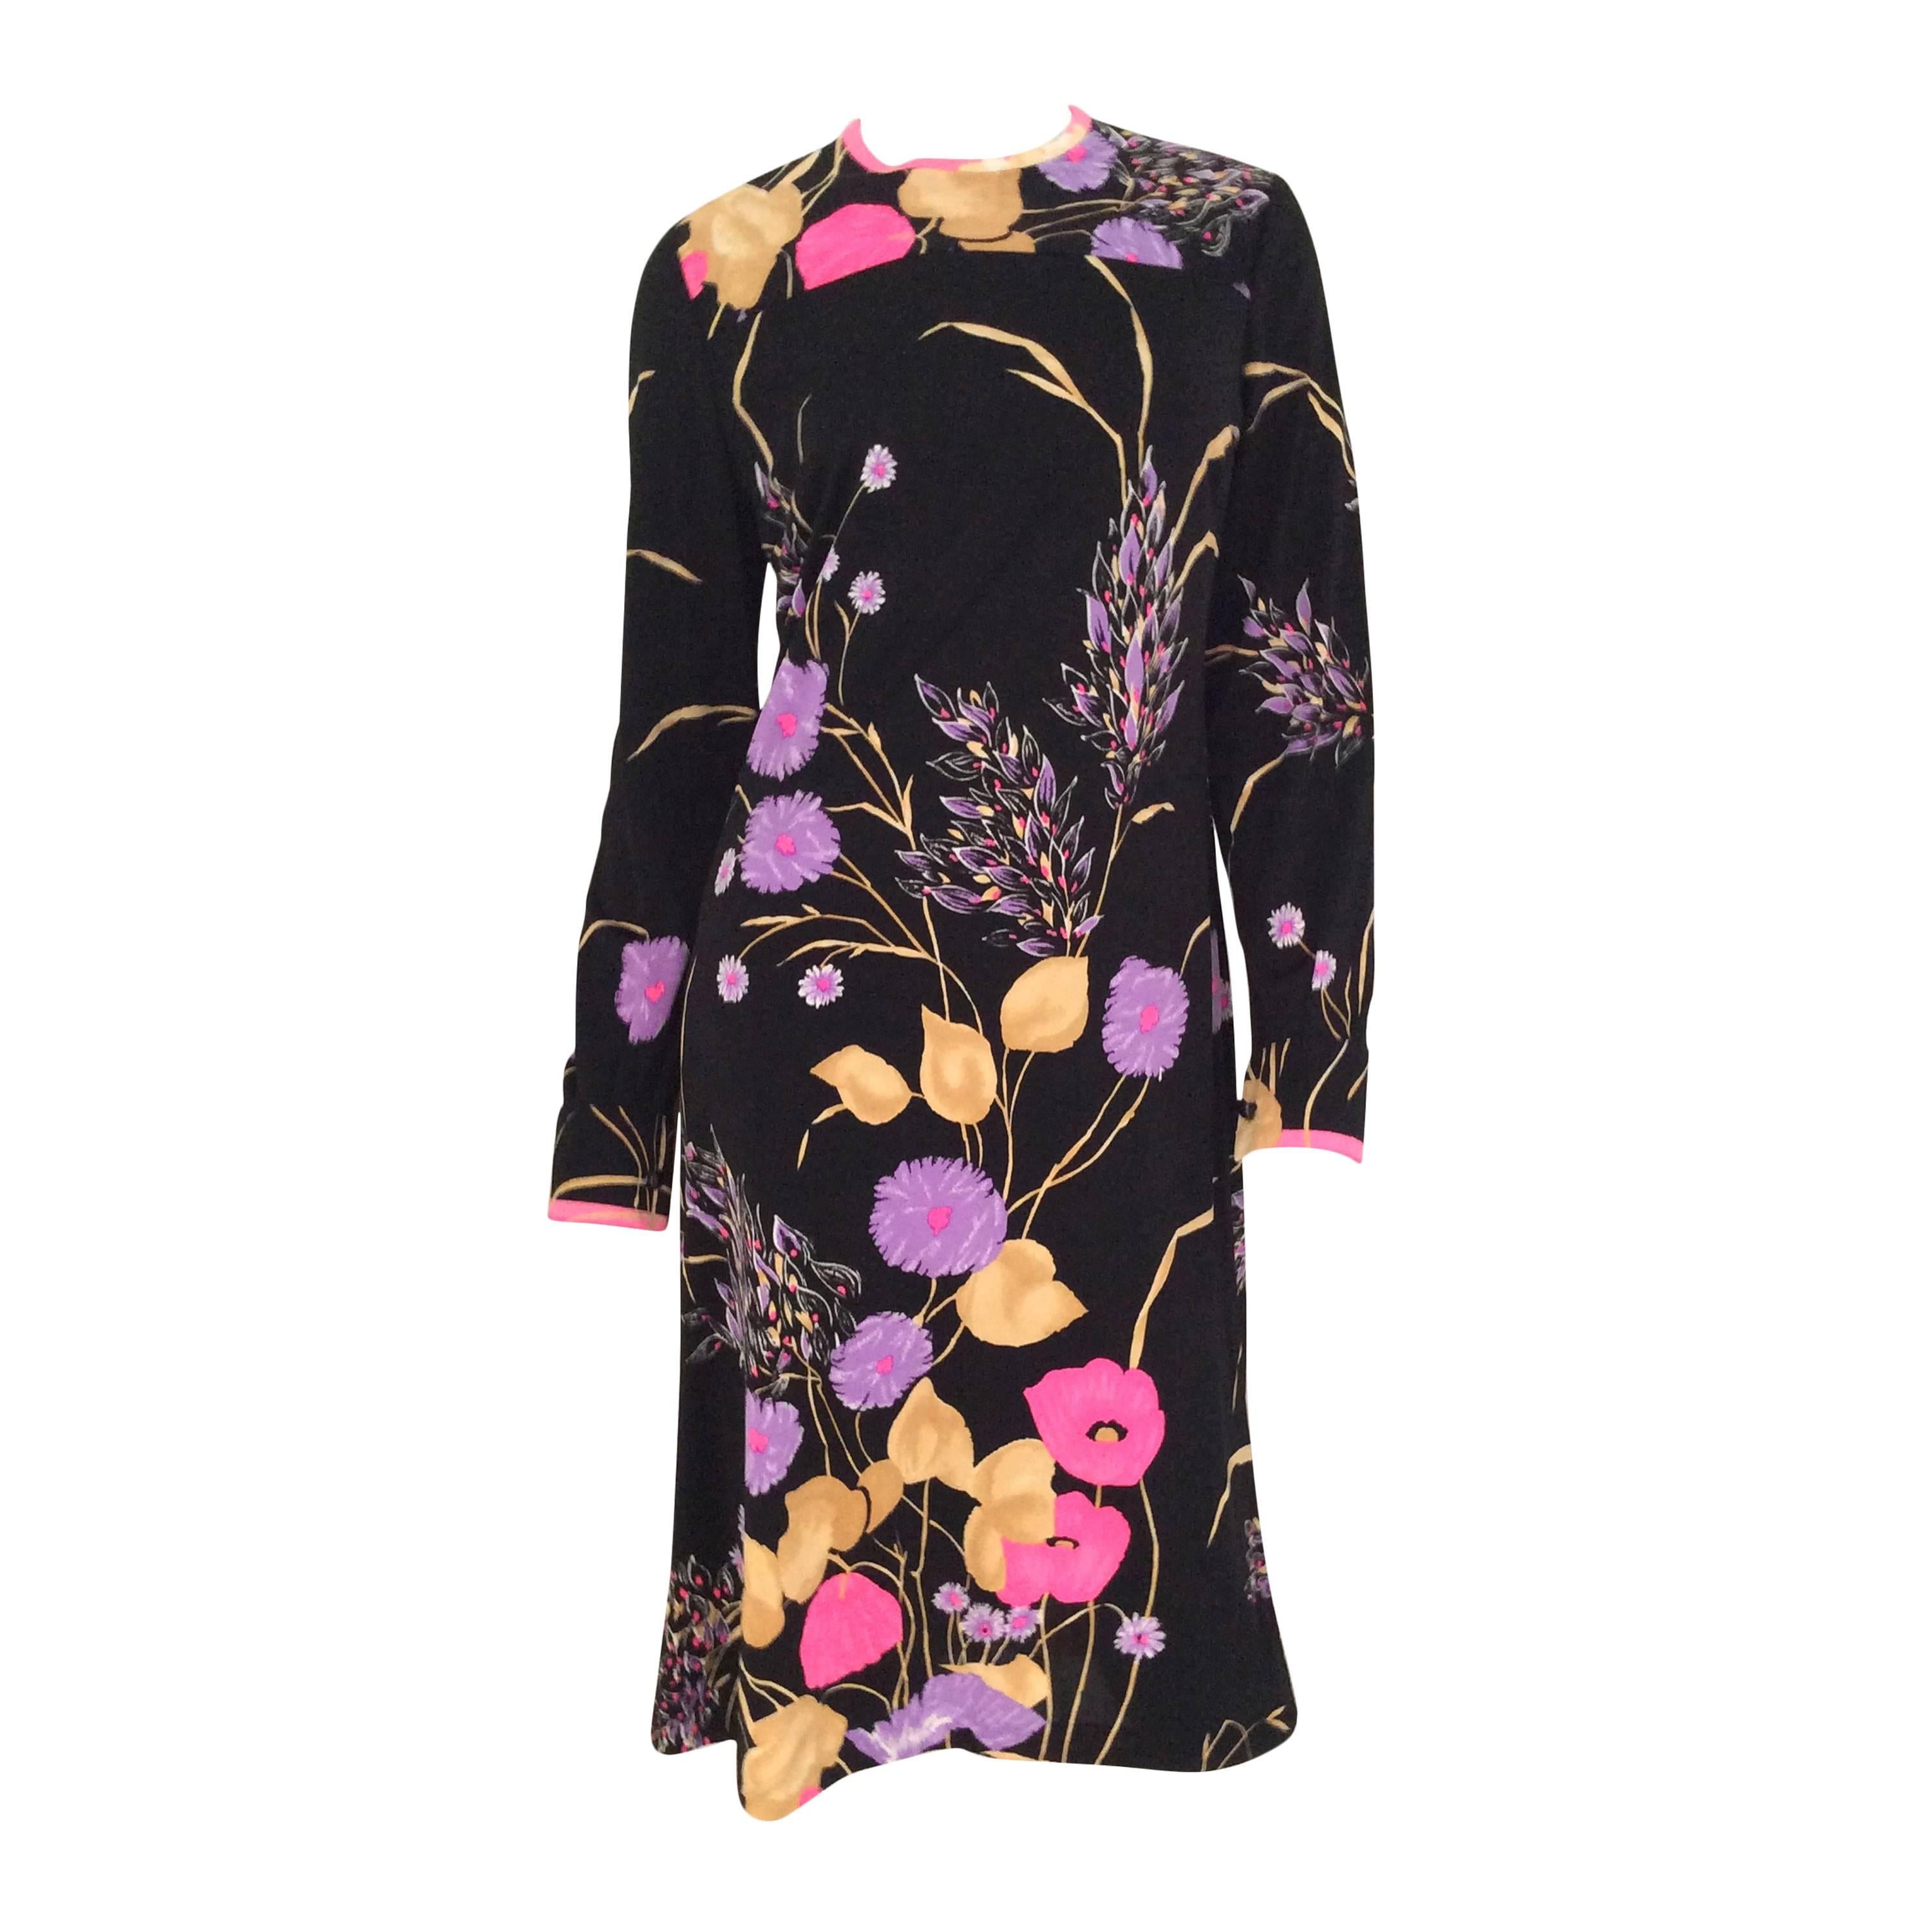 Leonard Dress - Black with Flowers - Mint Condition For Sale